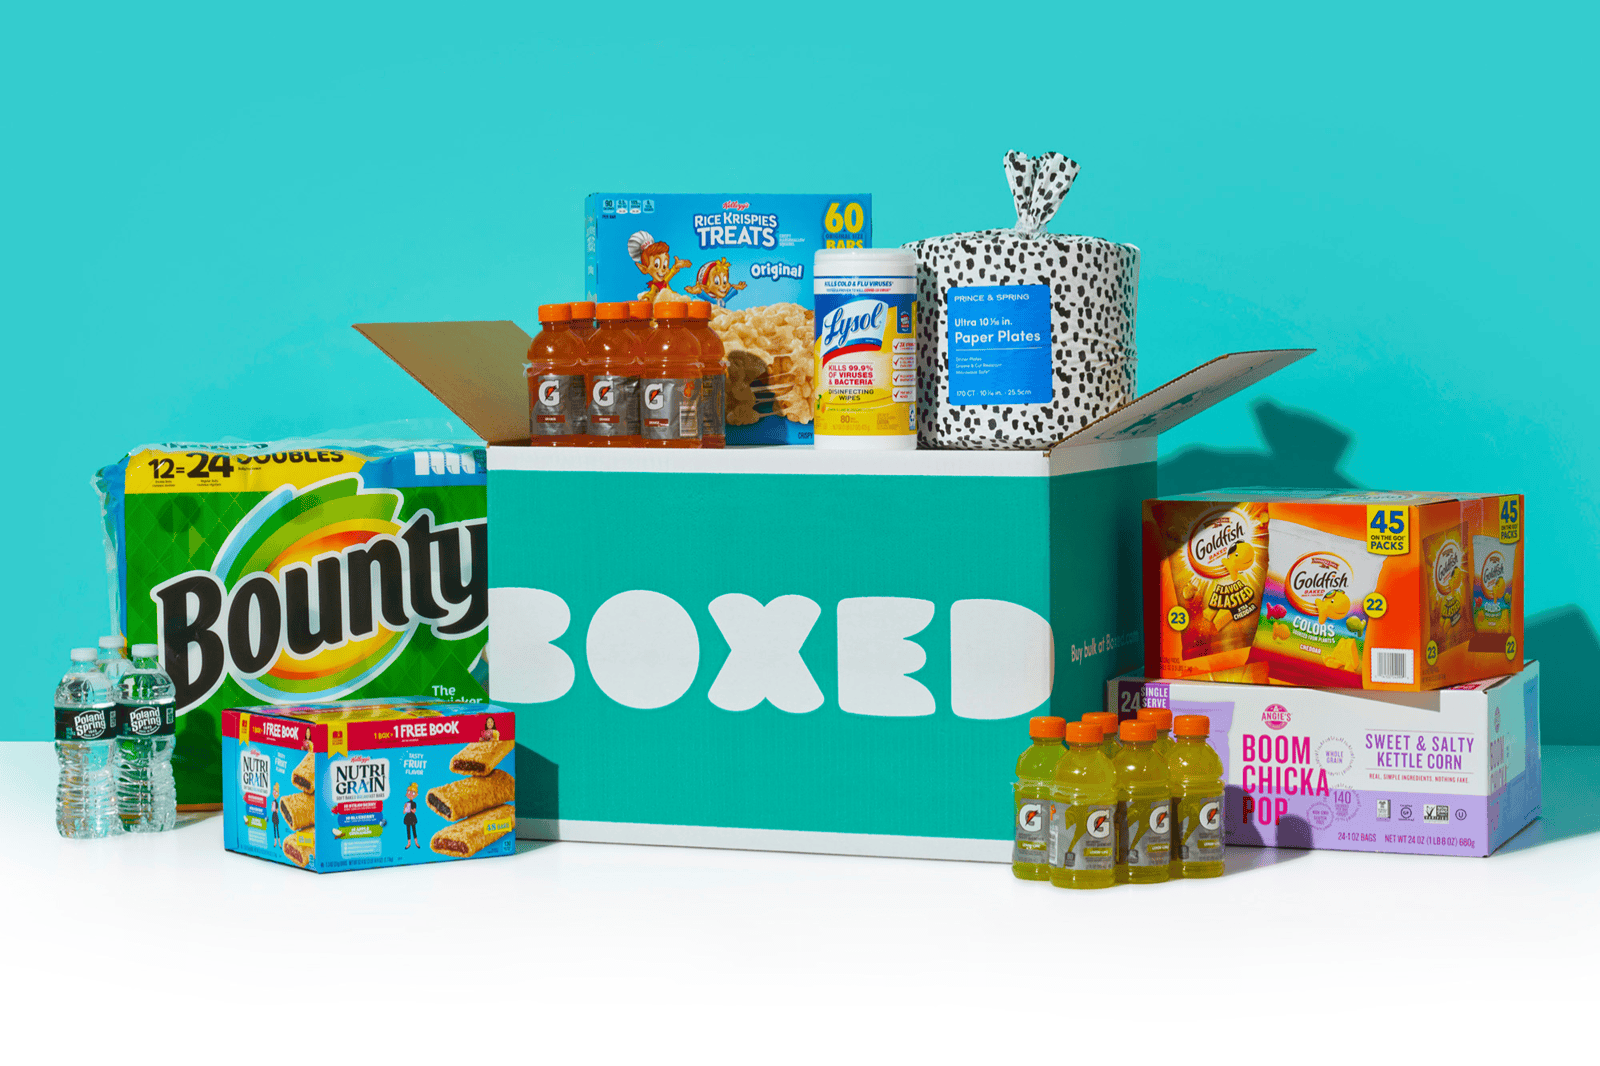 What went wrong with Boxed? the online bulk delivery service.